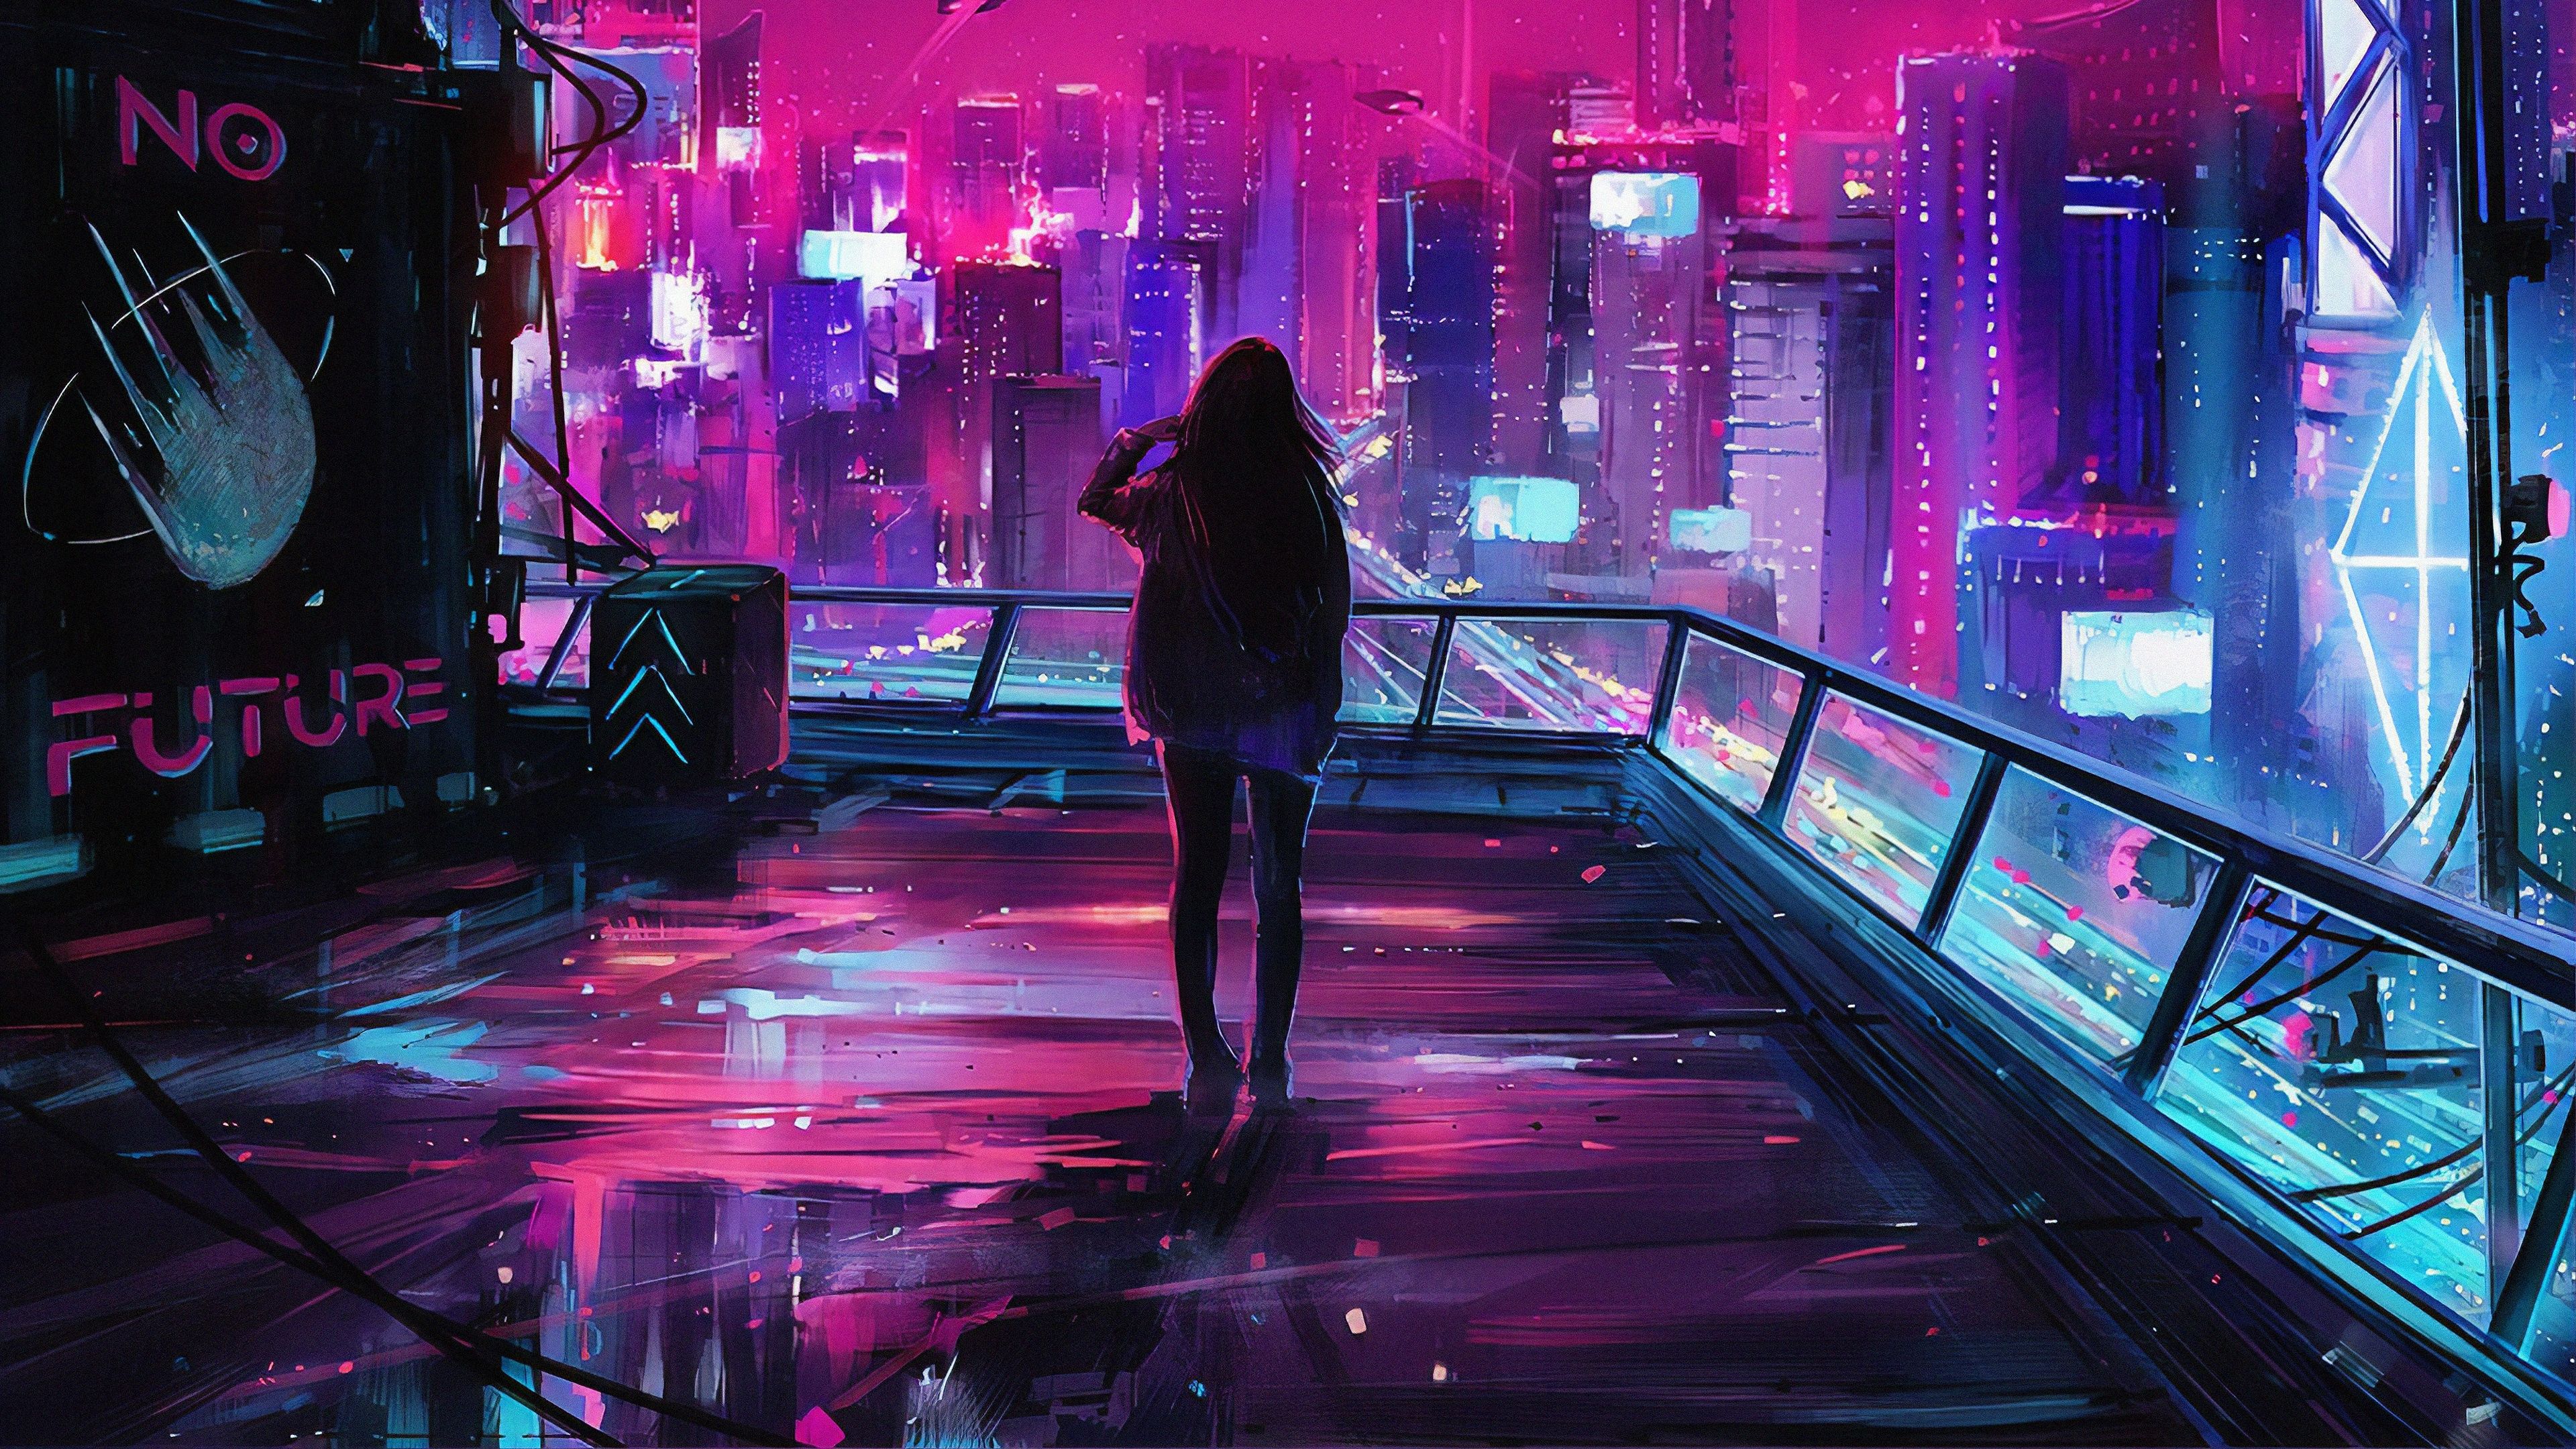 Download 3840x2160 Neon City, Girl, Back View, Night, Lights Wallpaper for UHD TV